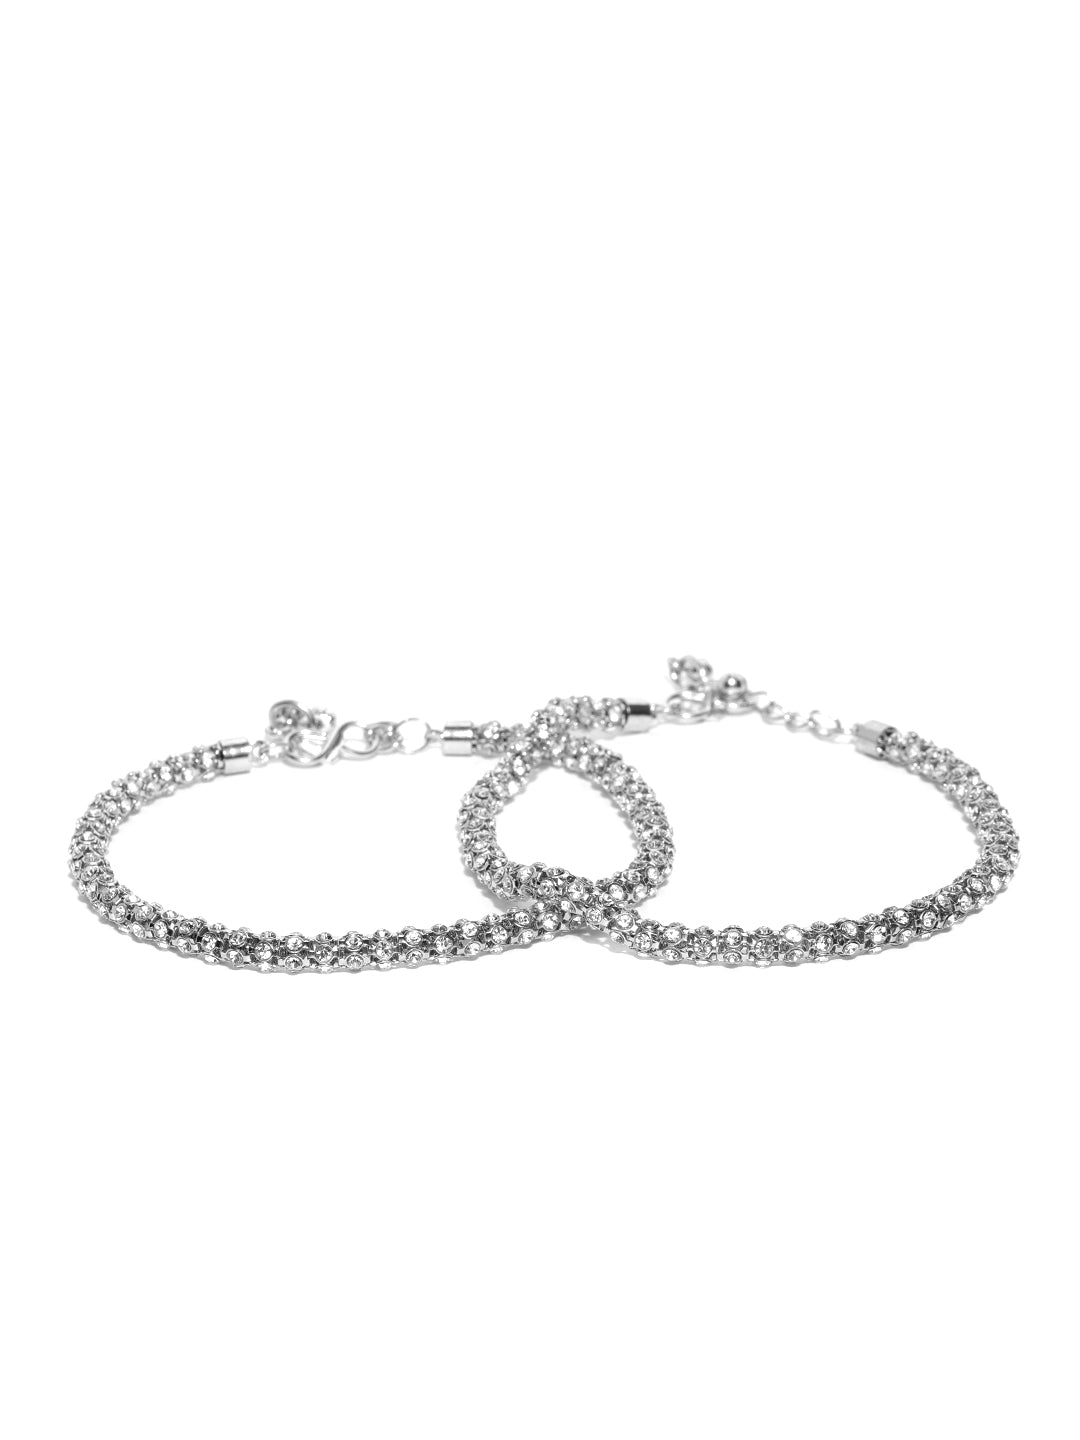 Silver-Toned Stone-Studded Anklets For Women And Girls